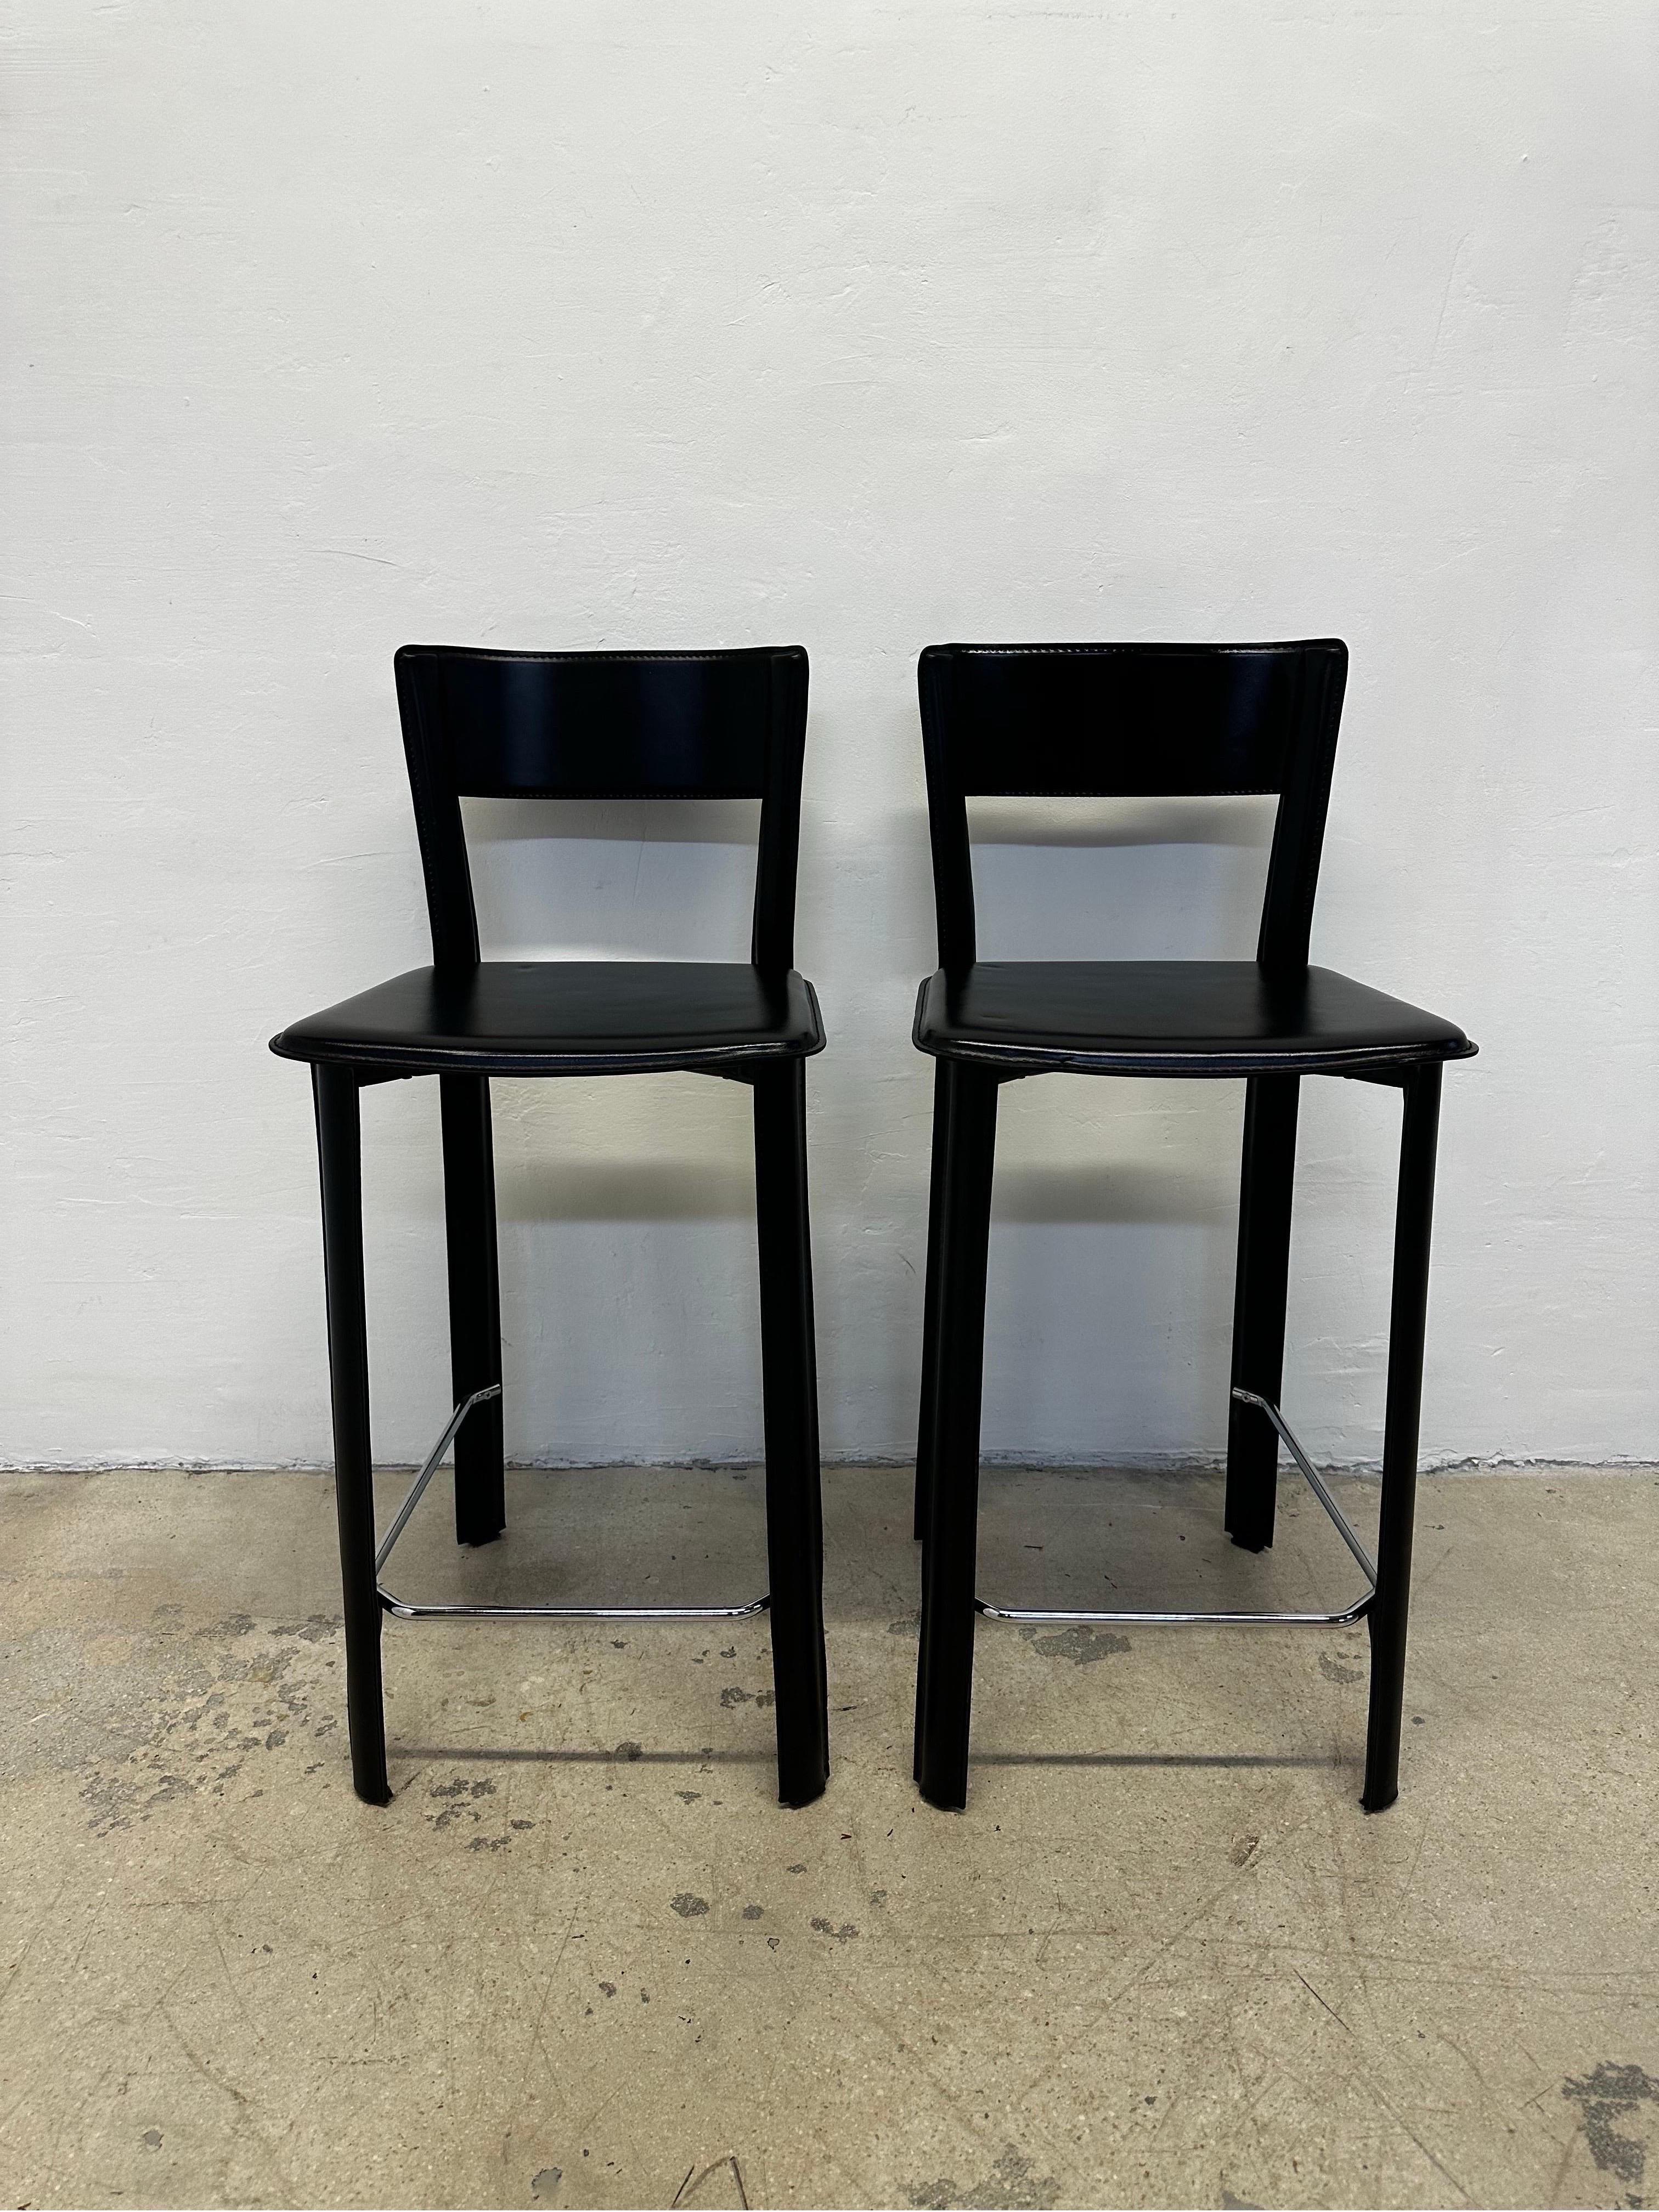 Pair of stitched Italian black leather counter stools with chrome foot rests by Frag Italy.